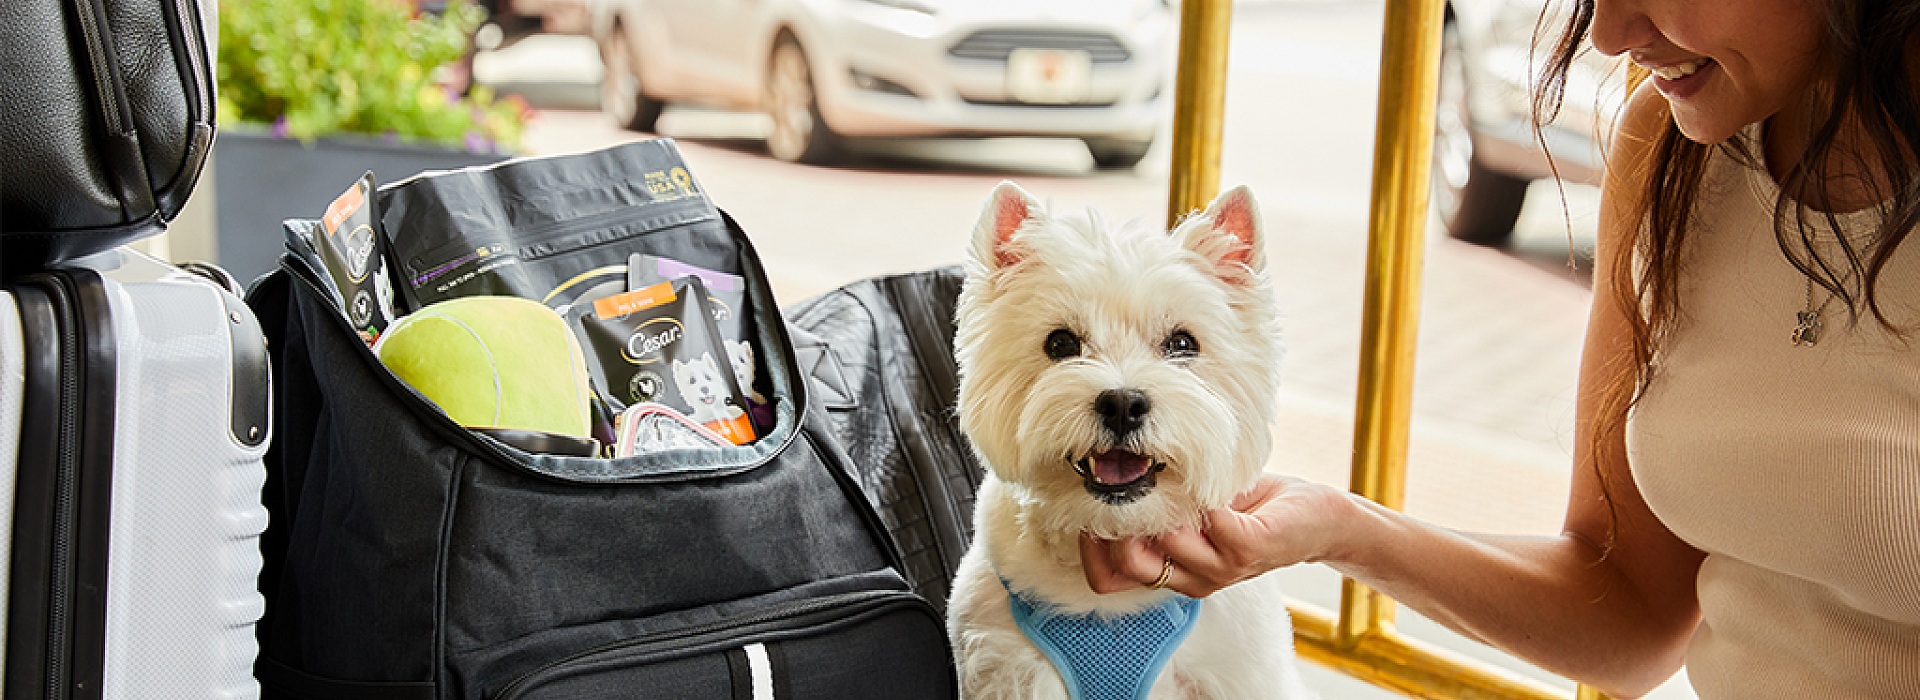 Mars announces partnership with Tripadvisor, connecting today's pet parents with better travel experiences